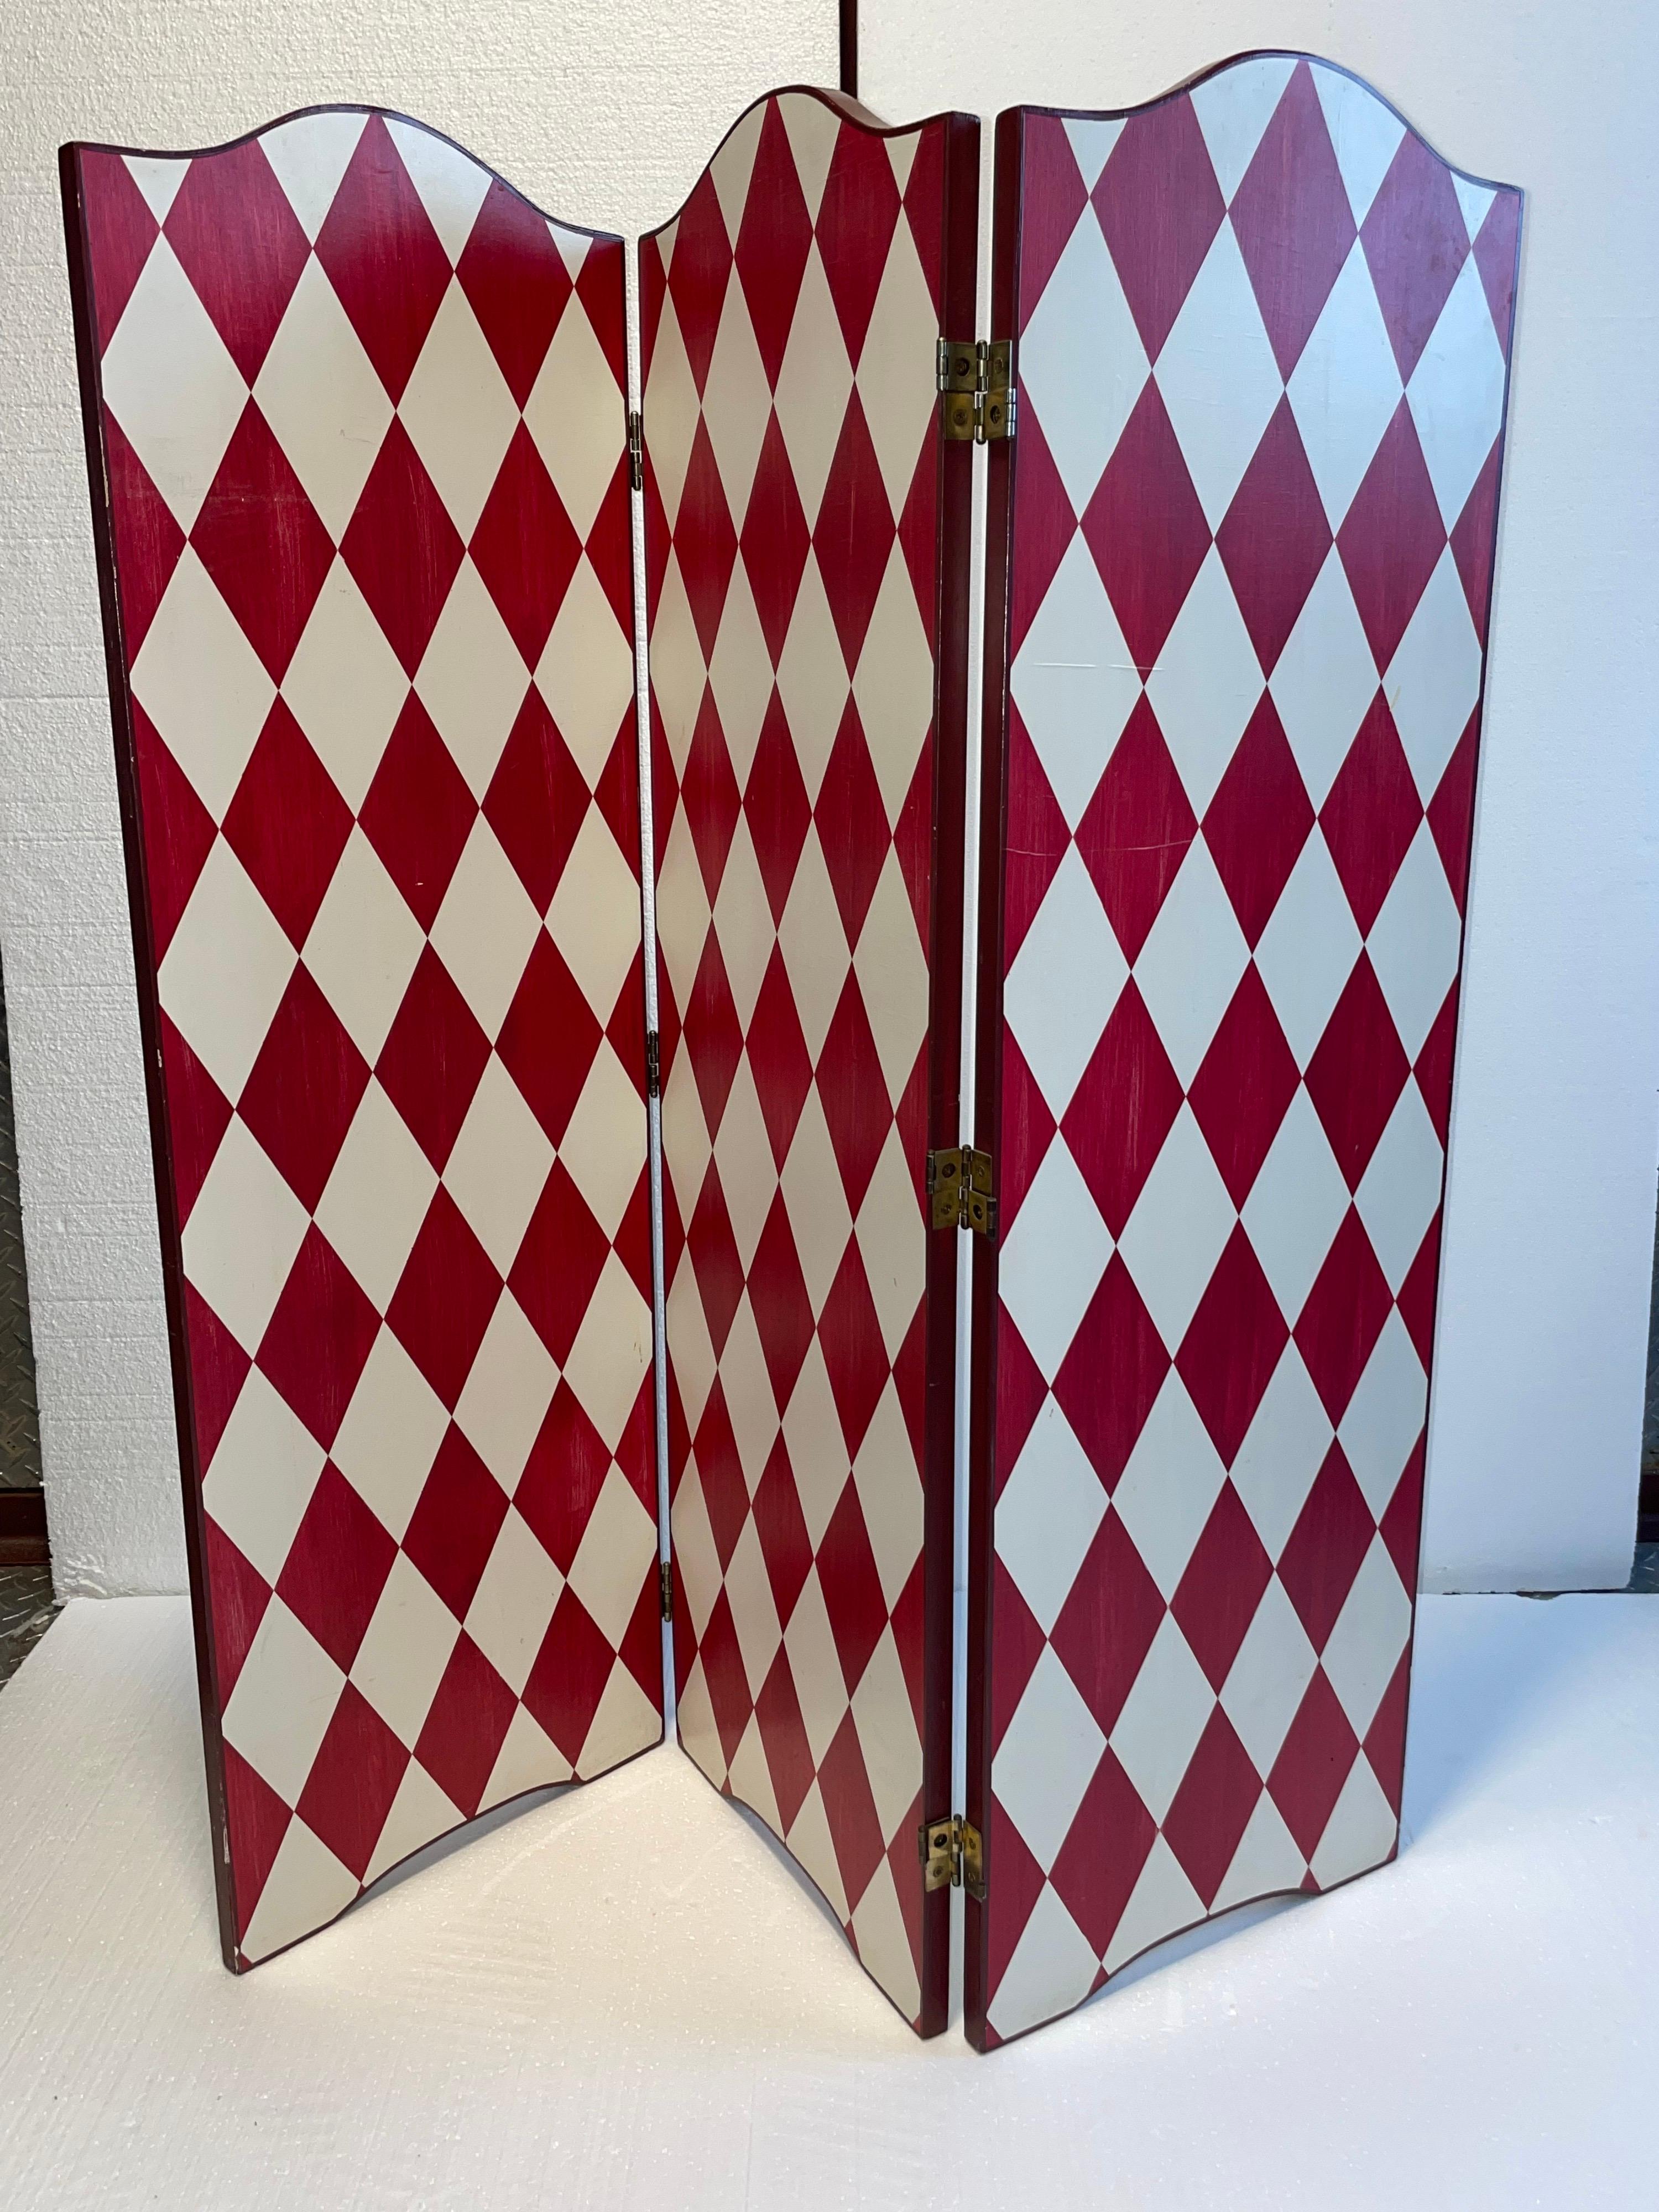 Hardwood Artistic Hand Painted French Screen Divider in a Festive White and Deep Red For Sale